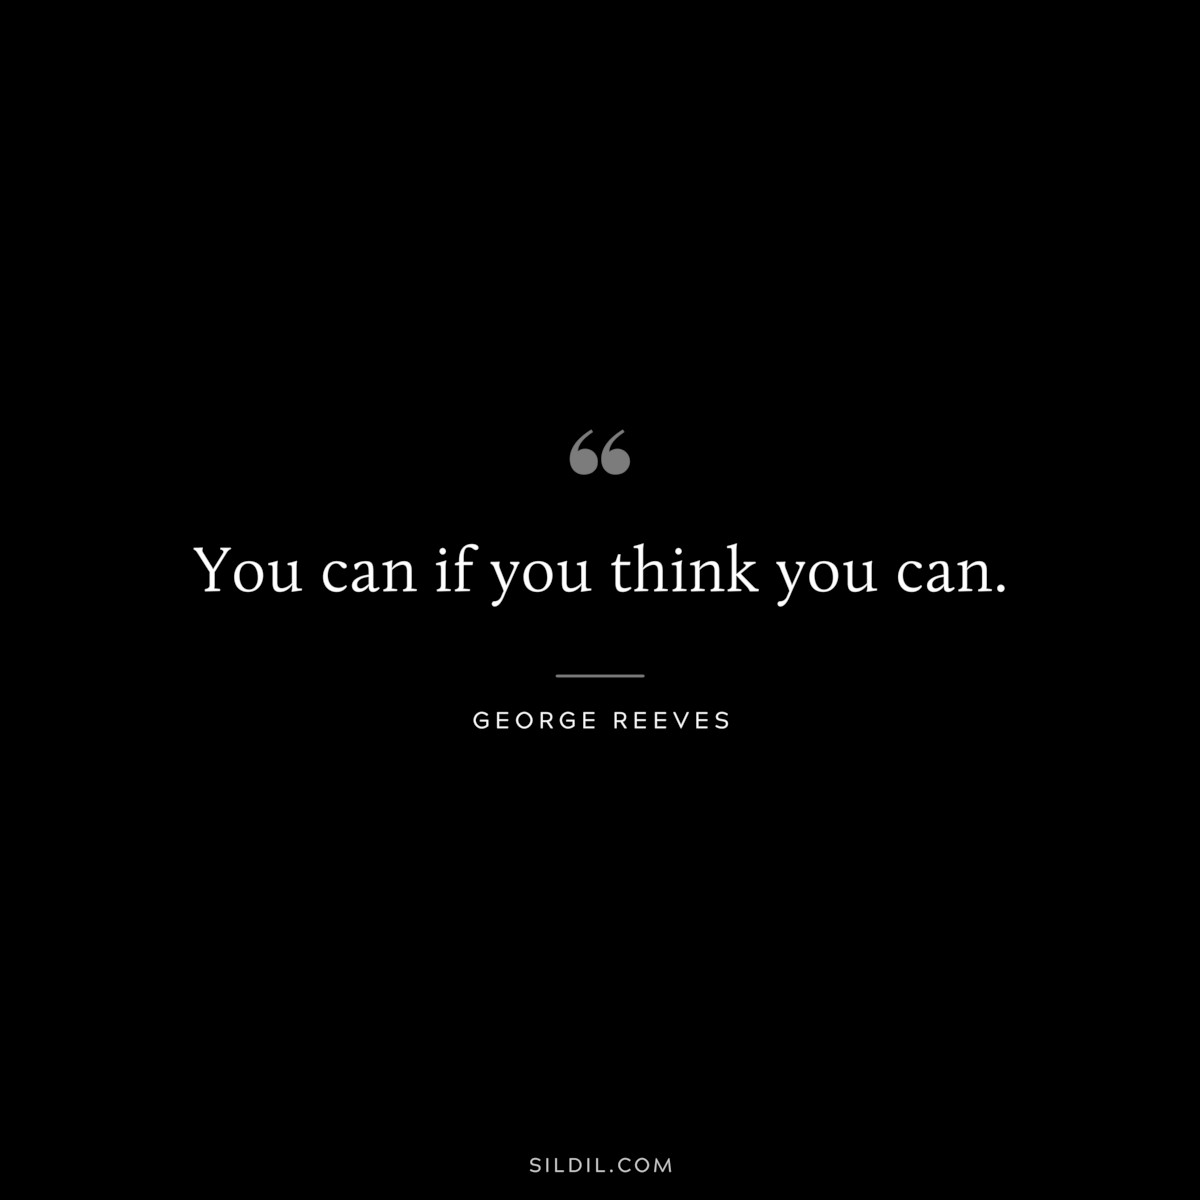 You can if you think you can. ― George Reeves